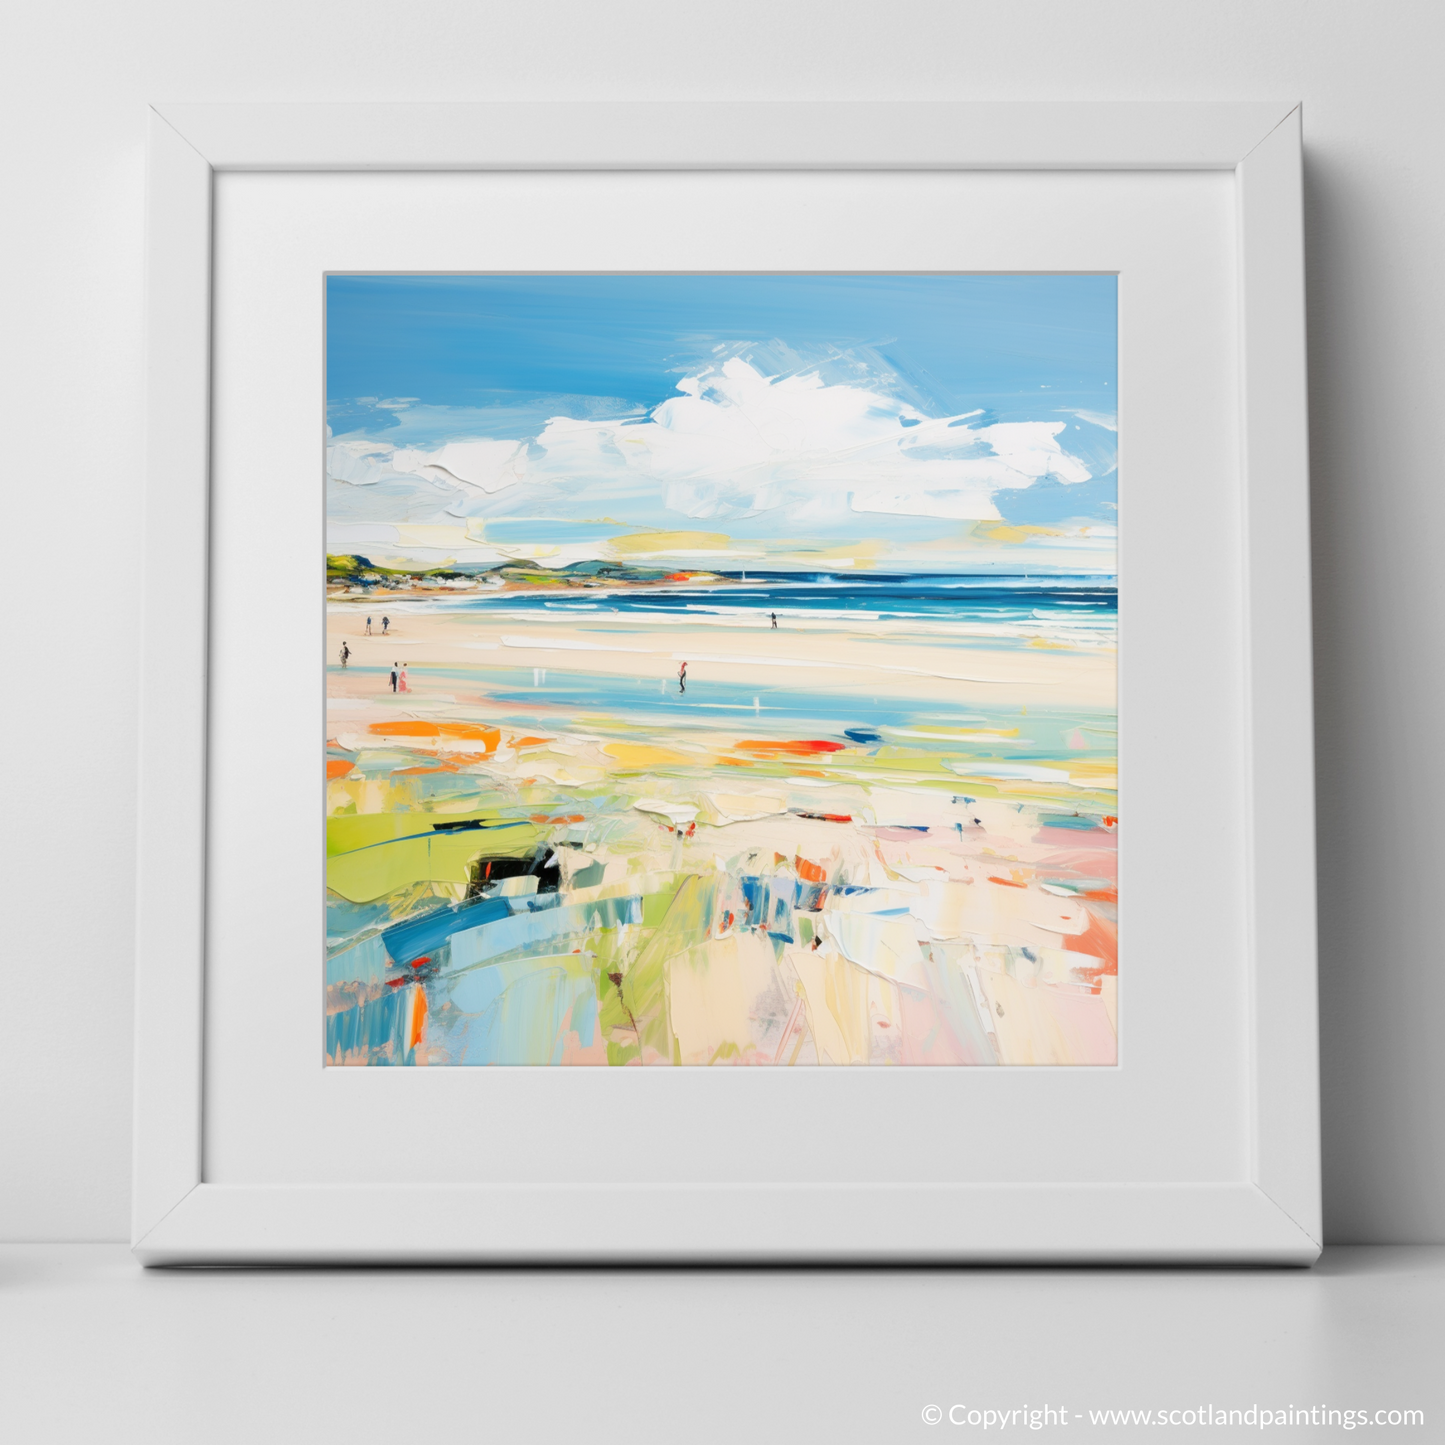 Art Print of St Cyrus Beach, Aberdeenshire in summer with a white frame